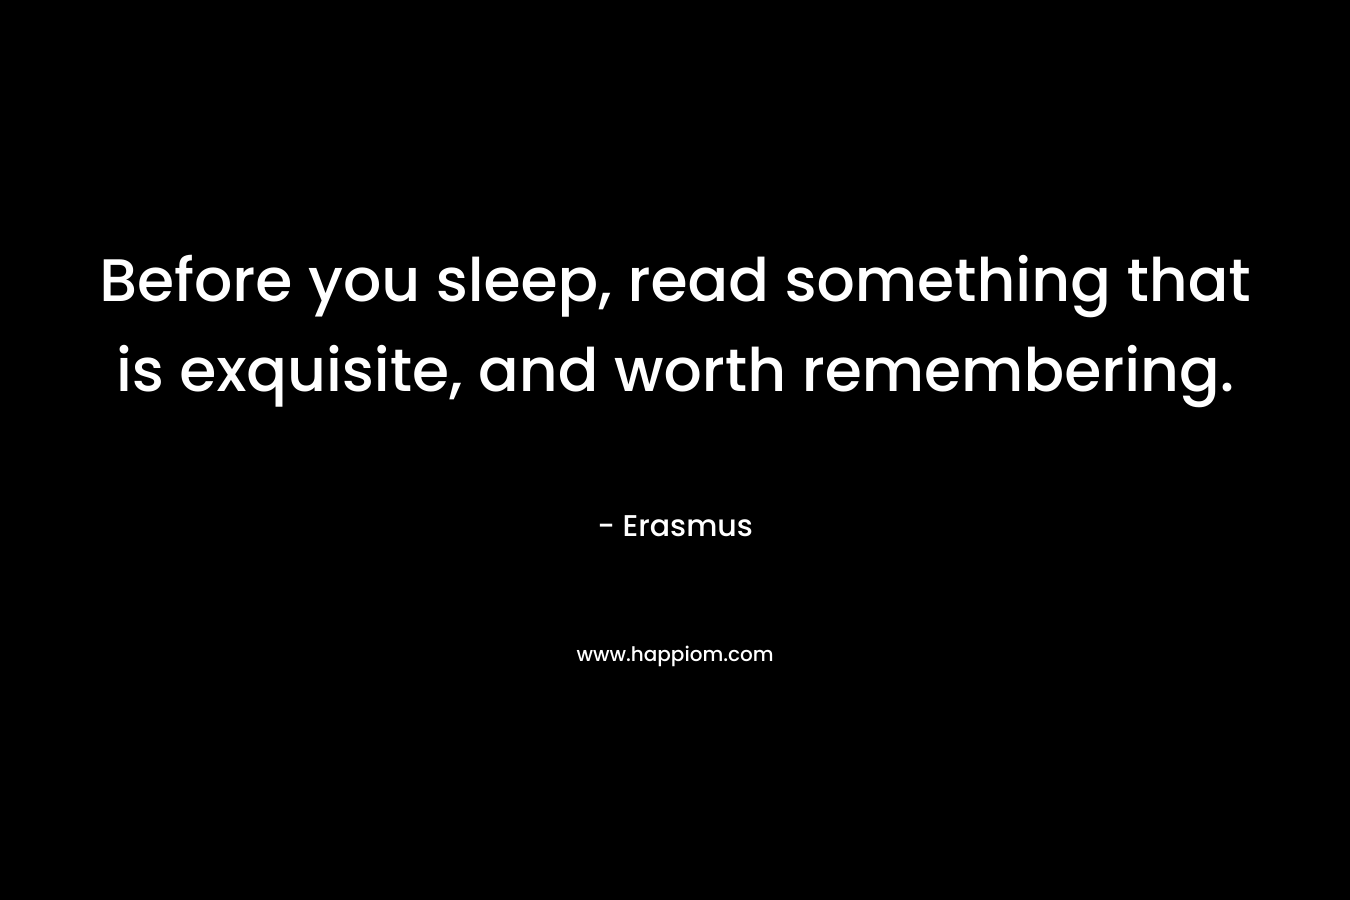 Before you sleep, read something that is exquisite, and worth remembering.